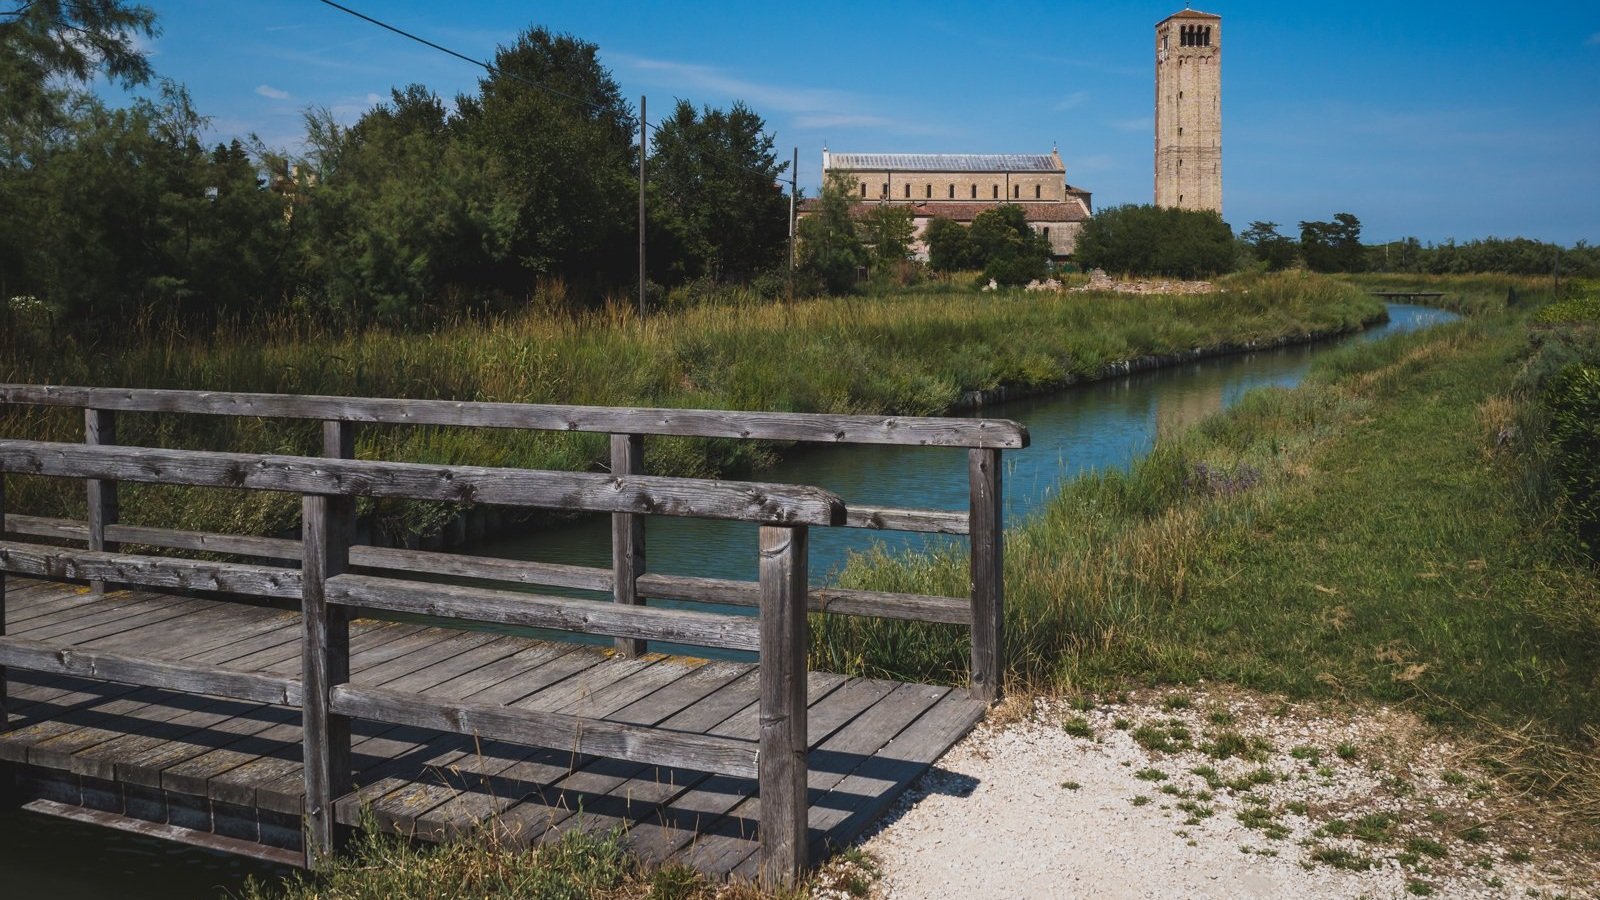 View onto Torcello cathedral and its bell tower, Venice lagoon